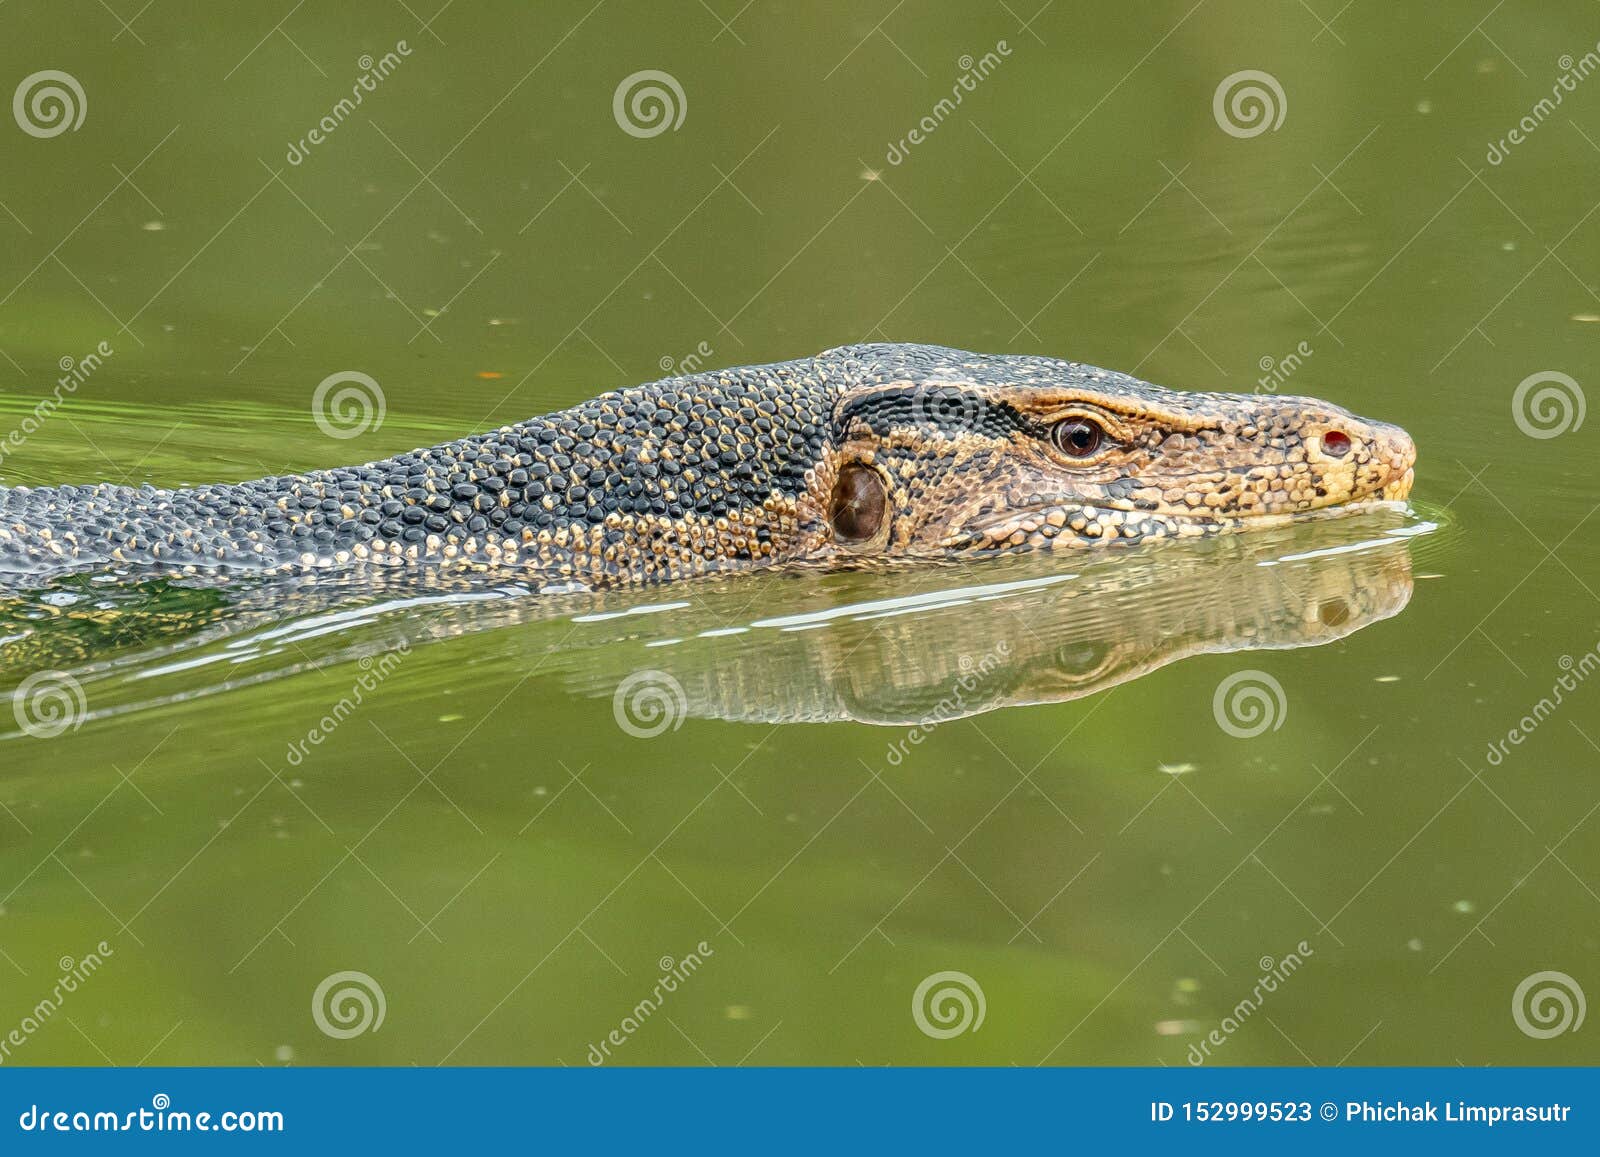 Asian Water Monitor Lizard Swimming In River Stock Image Image Of